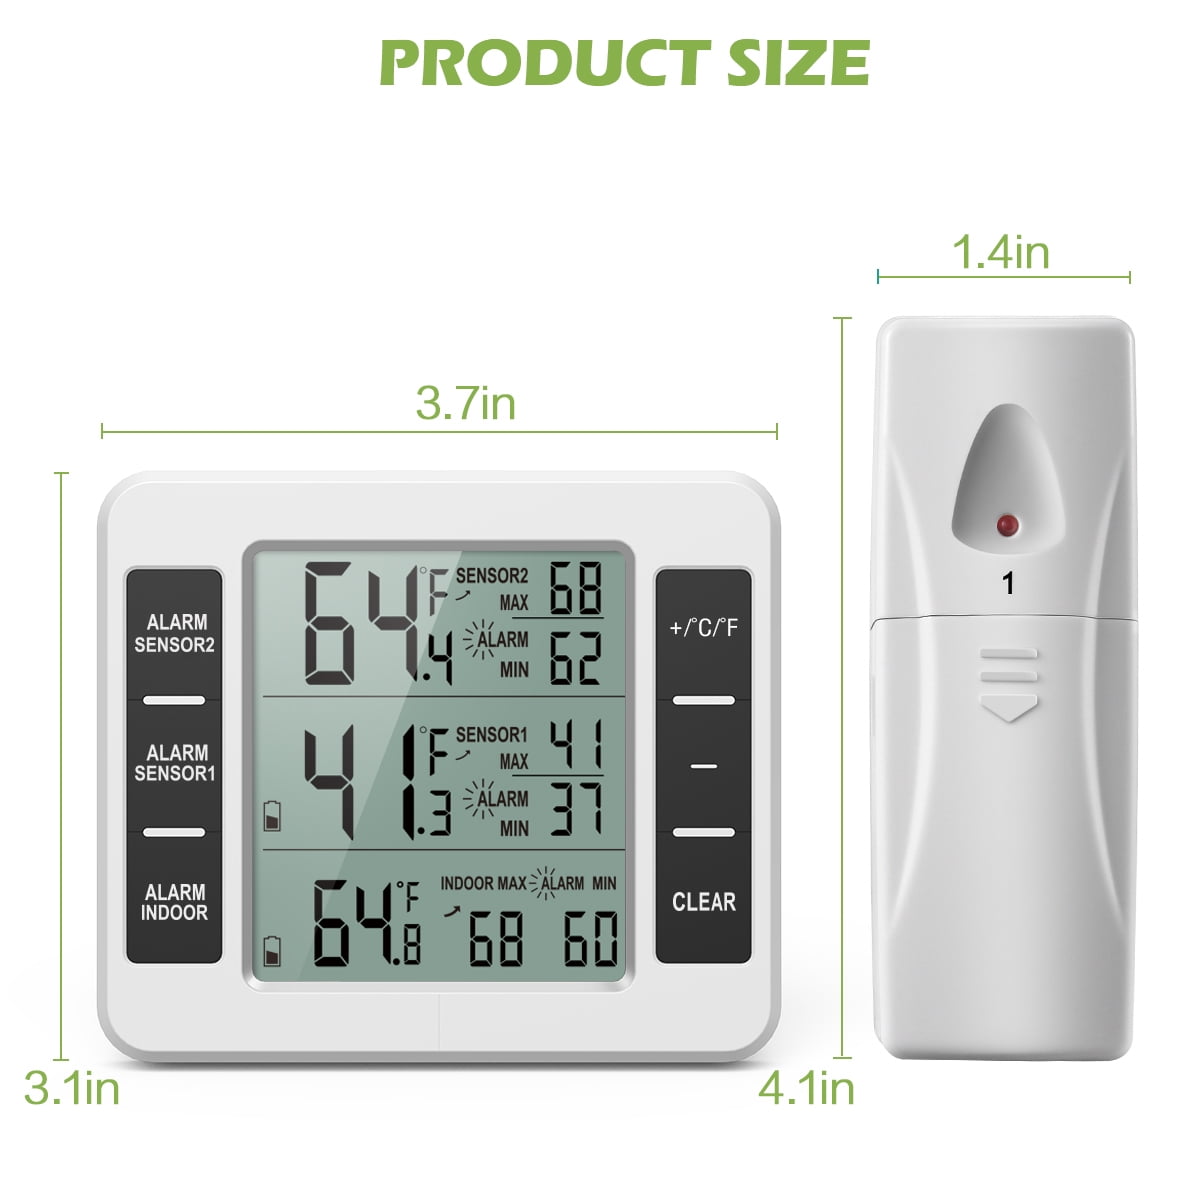 Refrigerator and Freezer Thermometer White-L304432837